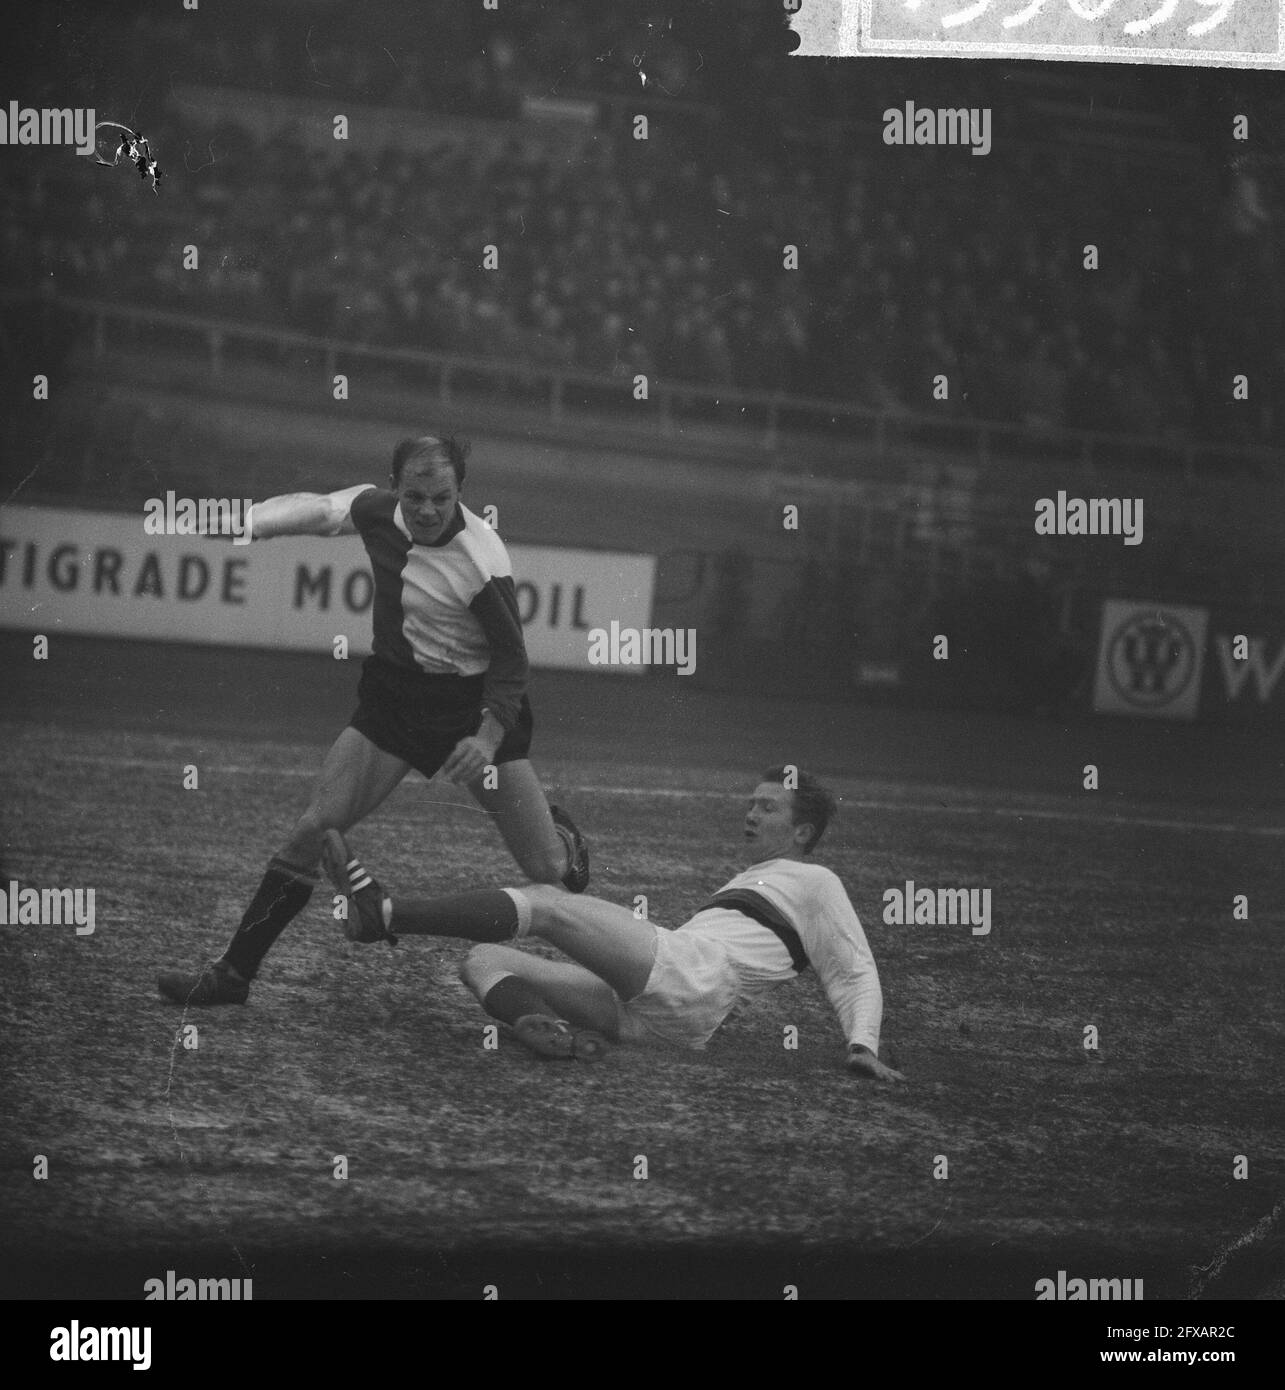 DWS against Feyenoord 2-0, Coen Moulijn in action, January 5, 1964, sports, soccer, The Netherlands, 20th century press agency photo, news to remember, documentary, historic photography 1945-1990, visual stories, human history of the Twentieth Century, capturing moments in time Stock Photo